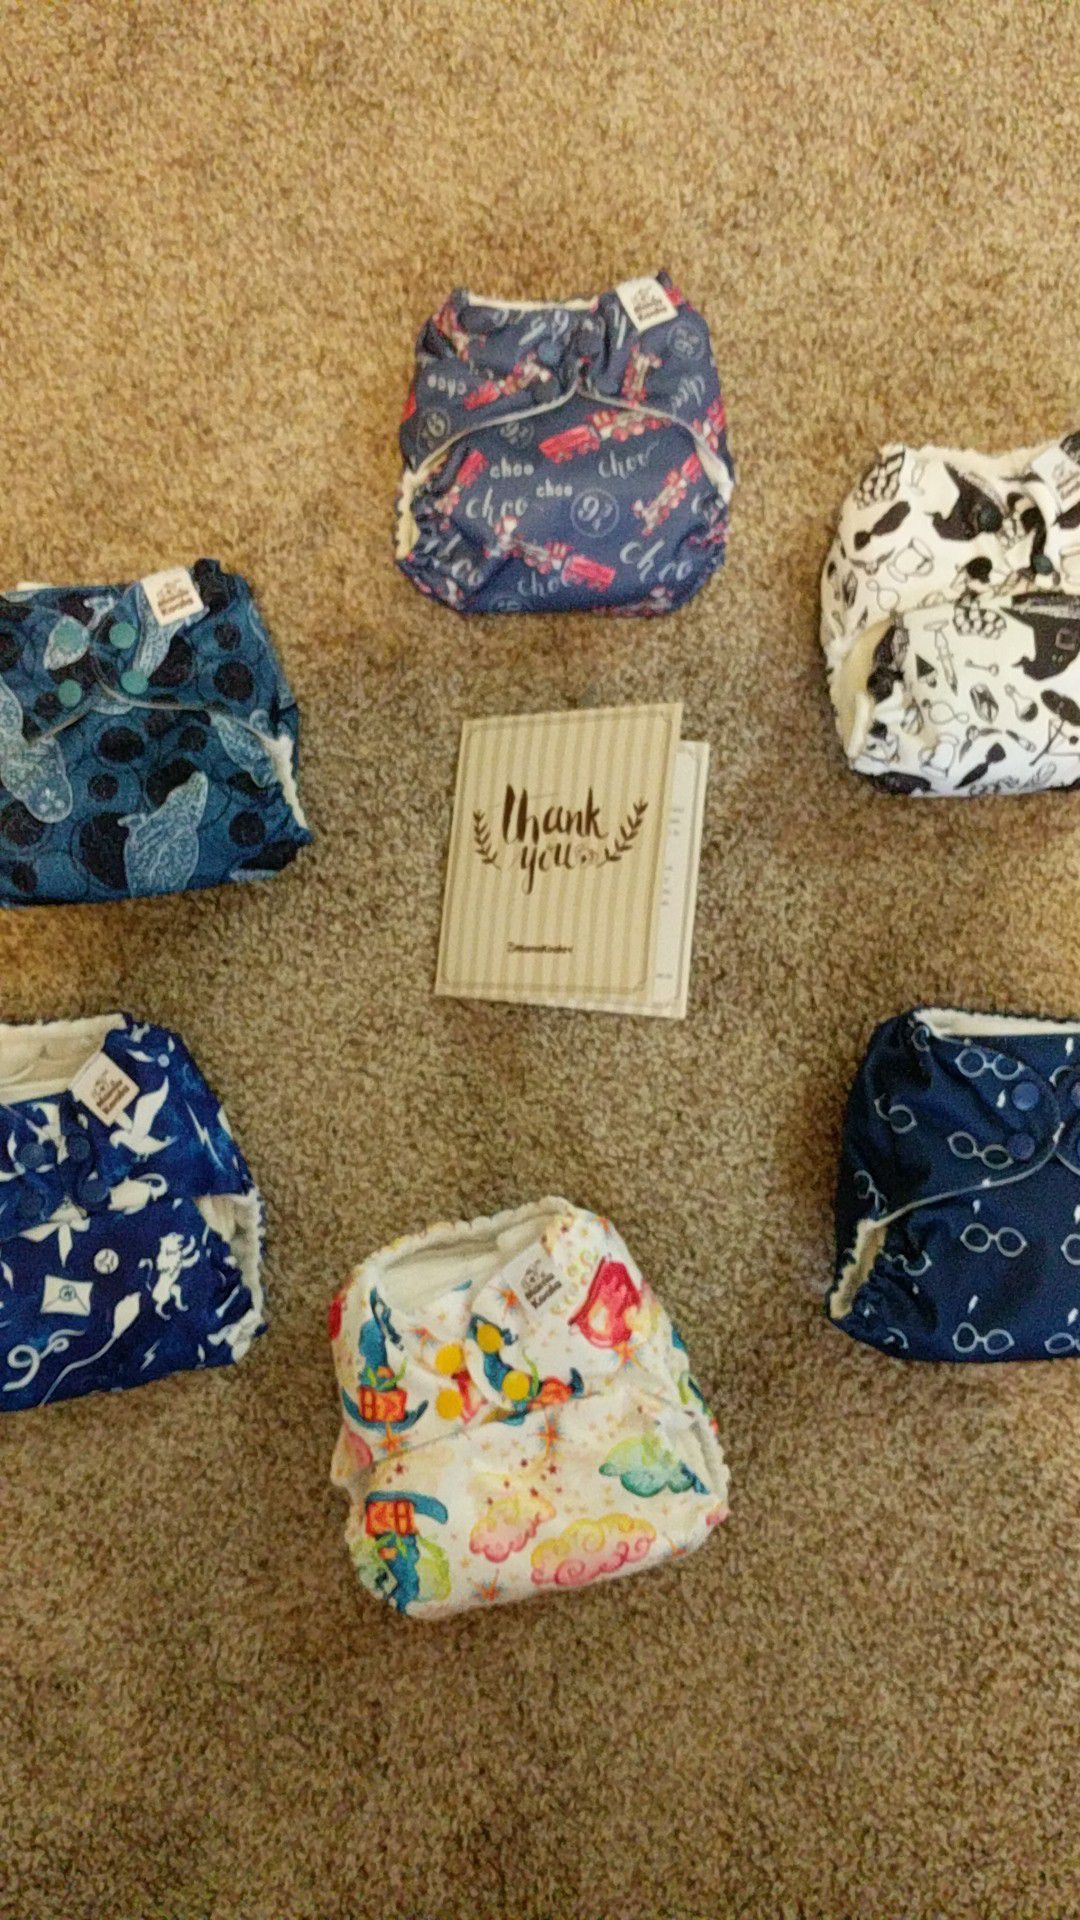 Reduced! Harry Potter Cloth Diapers- Brand New for Sale in Concord, NC -  OfferUp